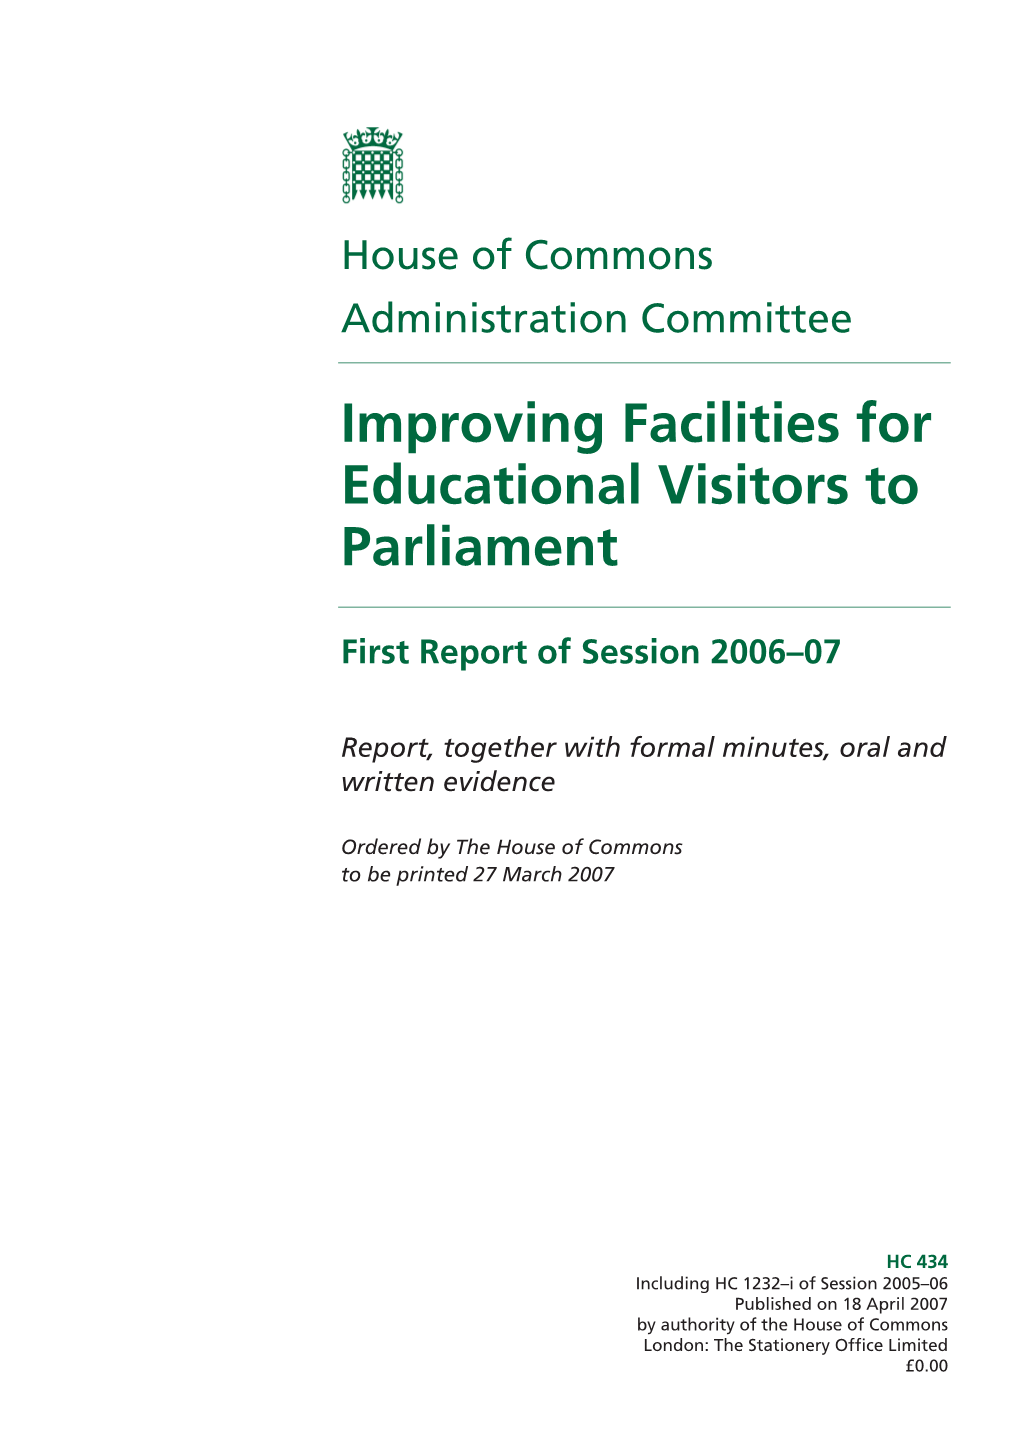 Improving Facilities for Educational Visitors to Parliament